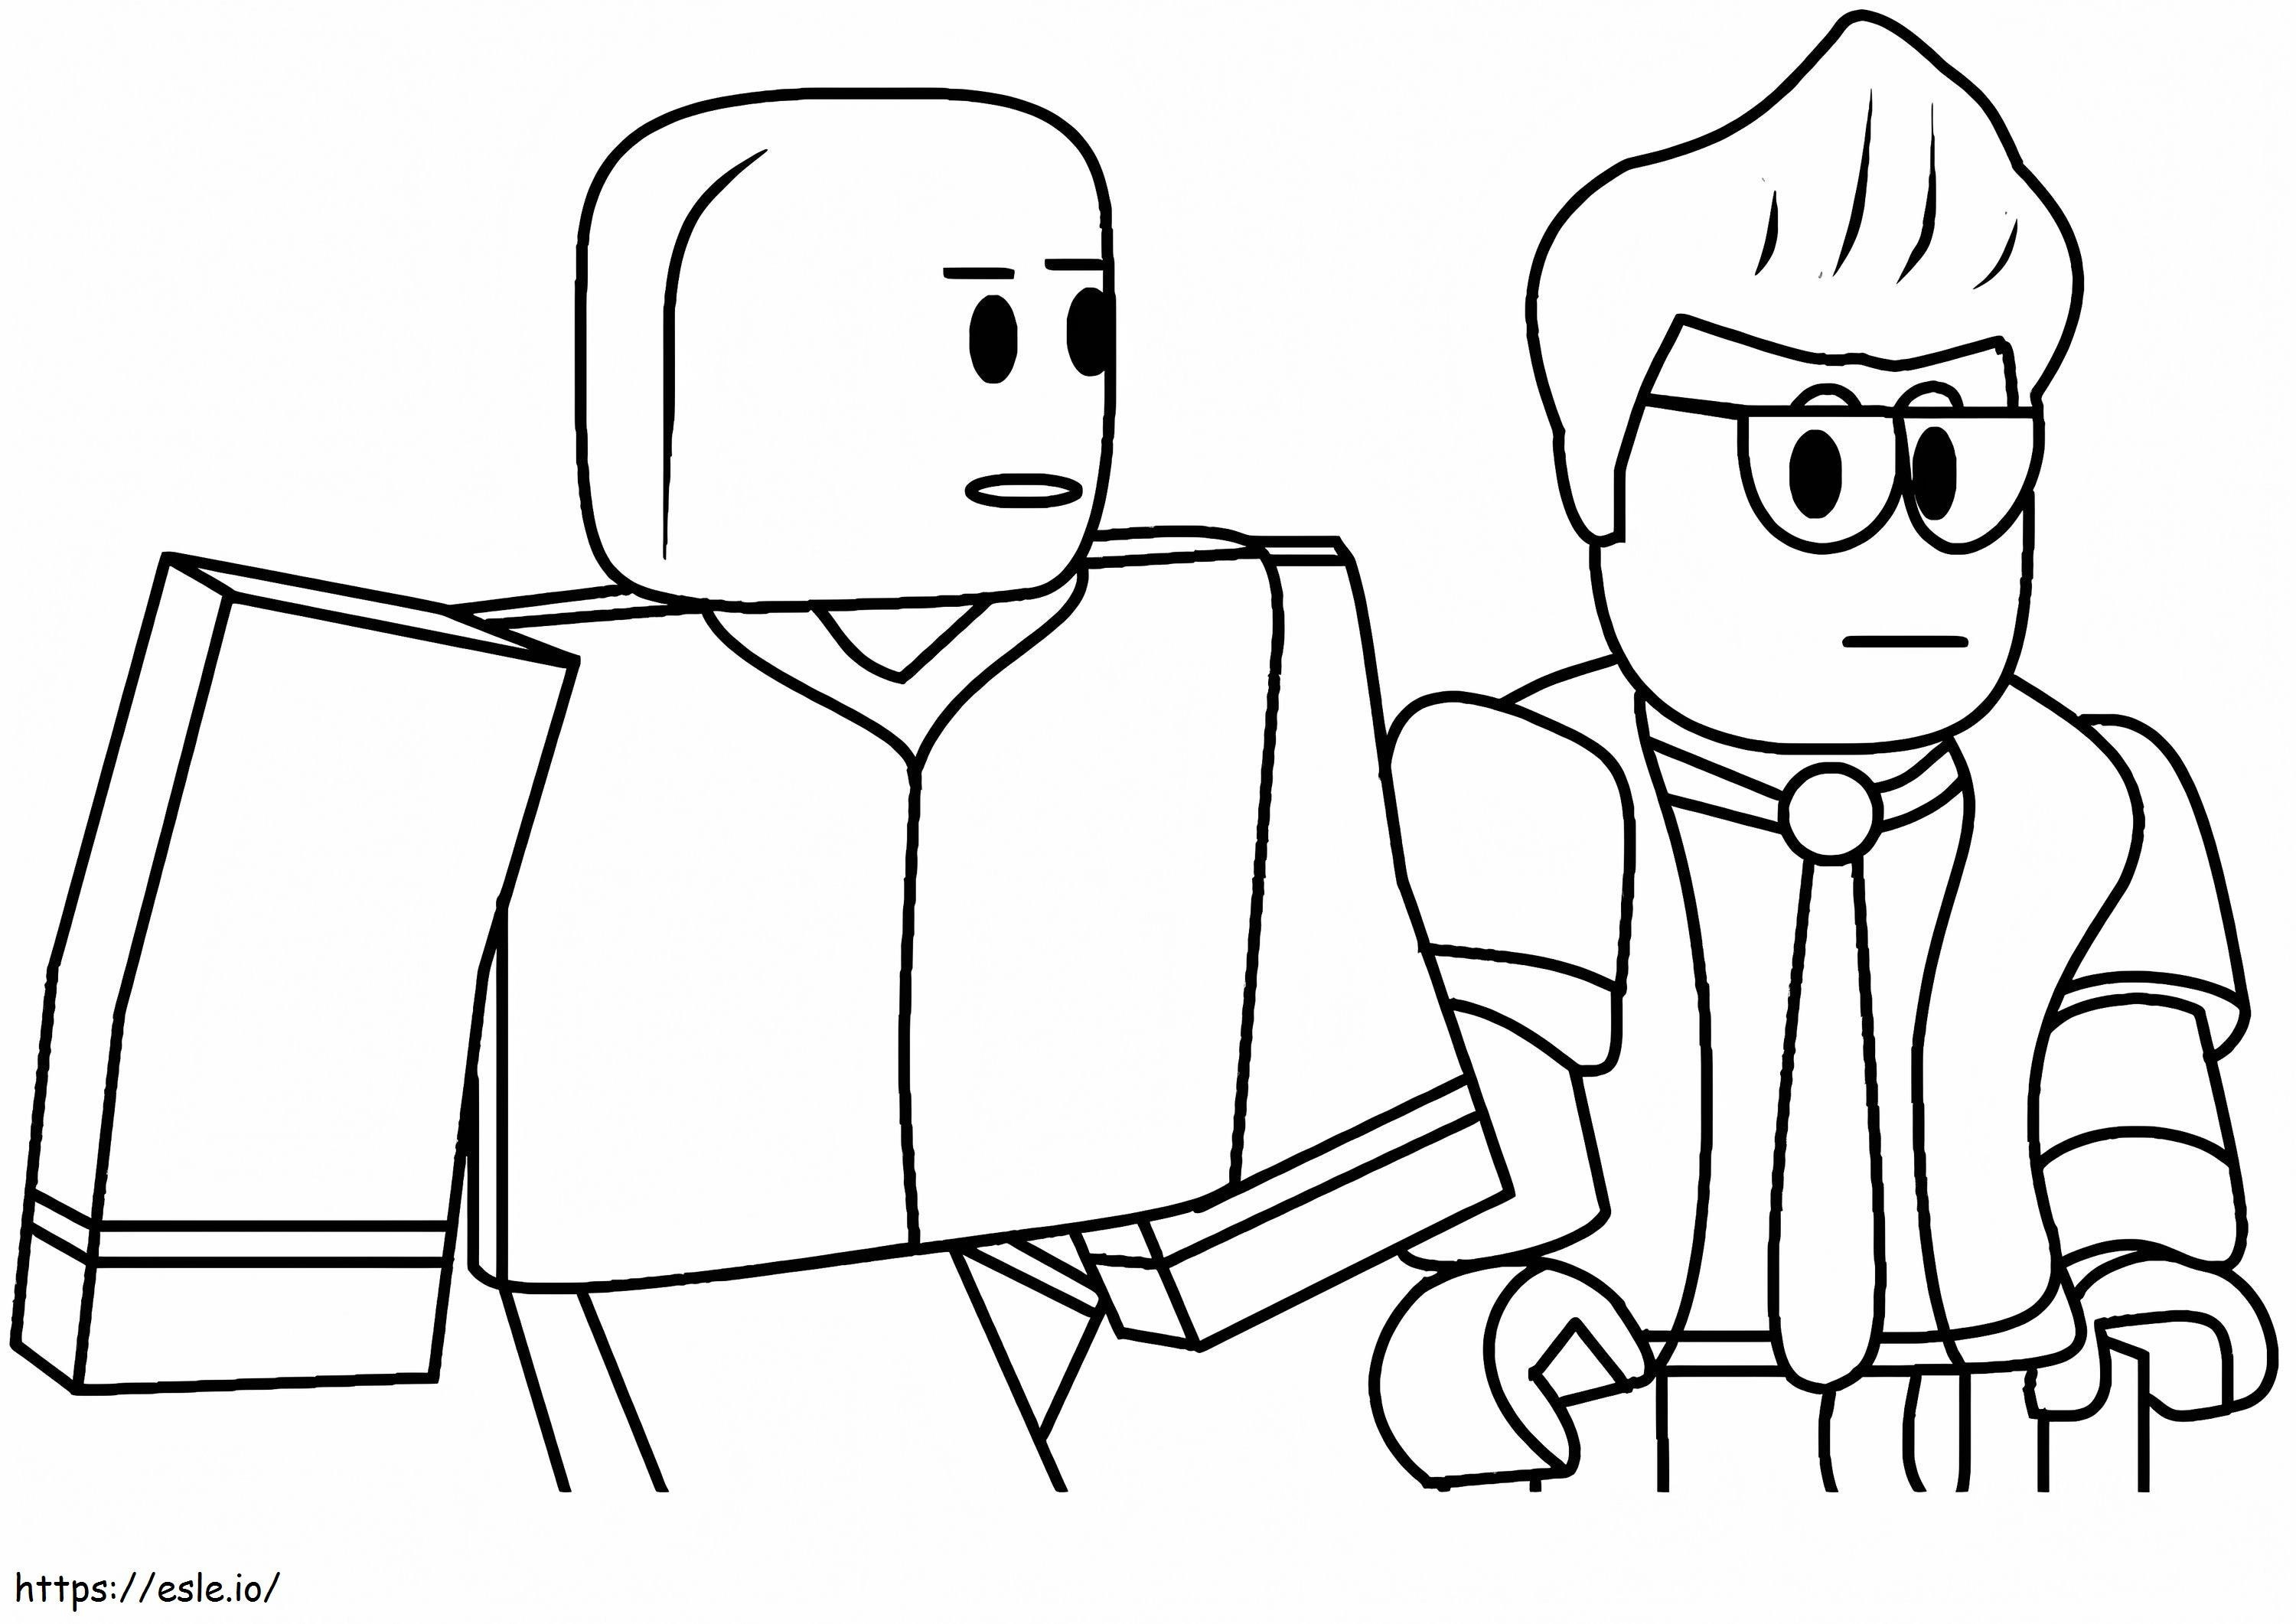 Roblox Game coloring page